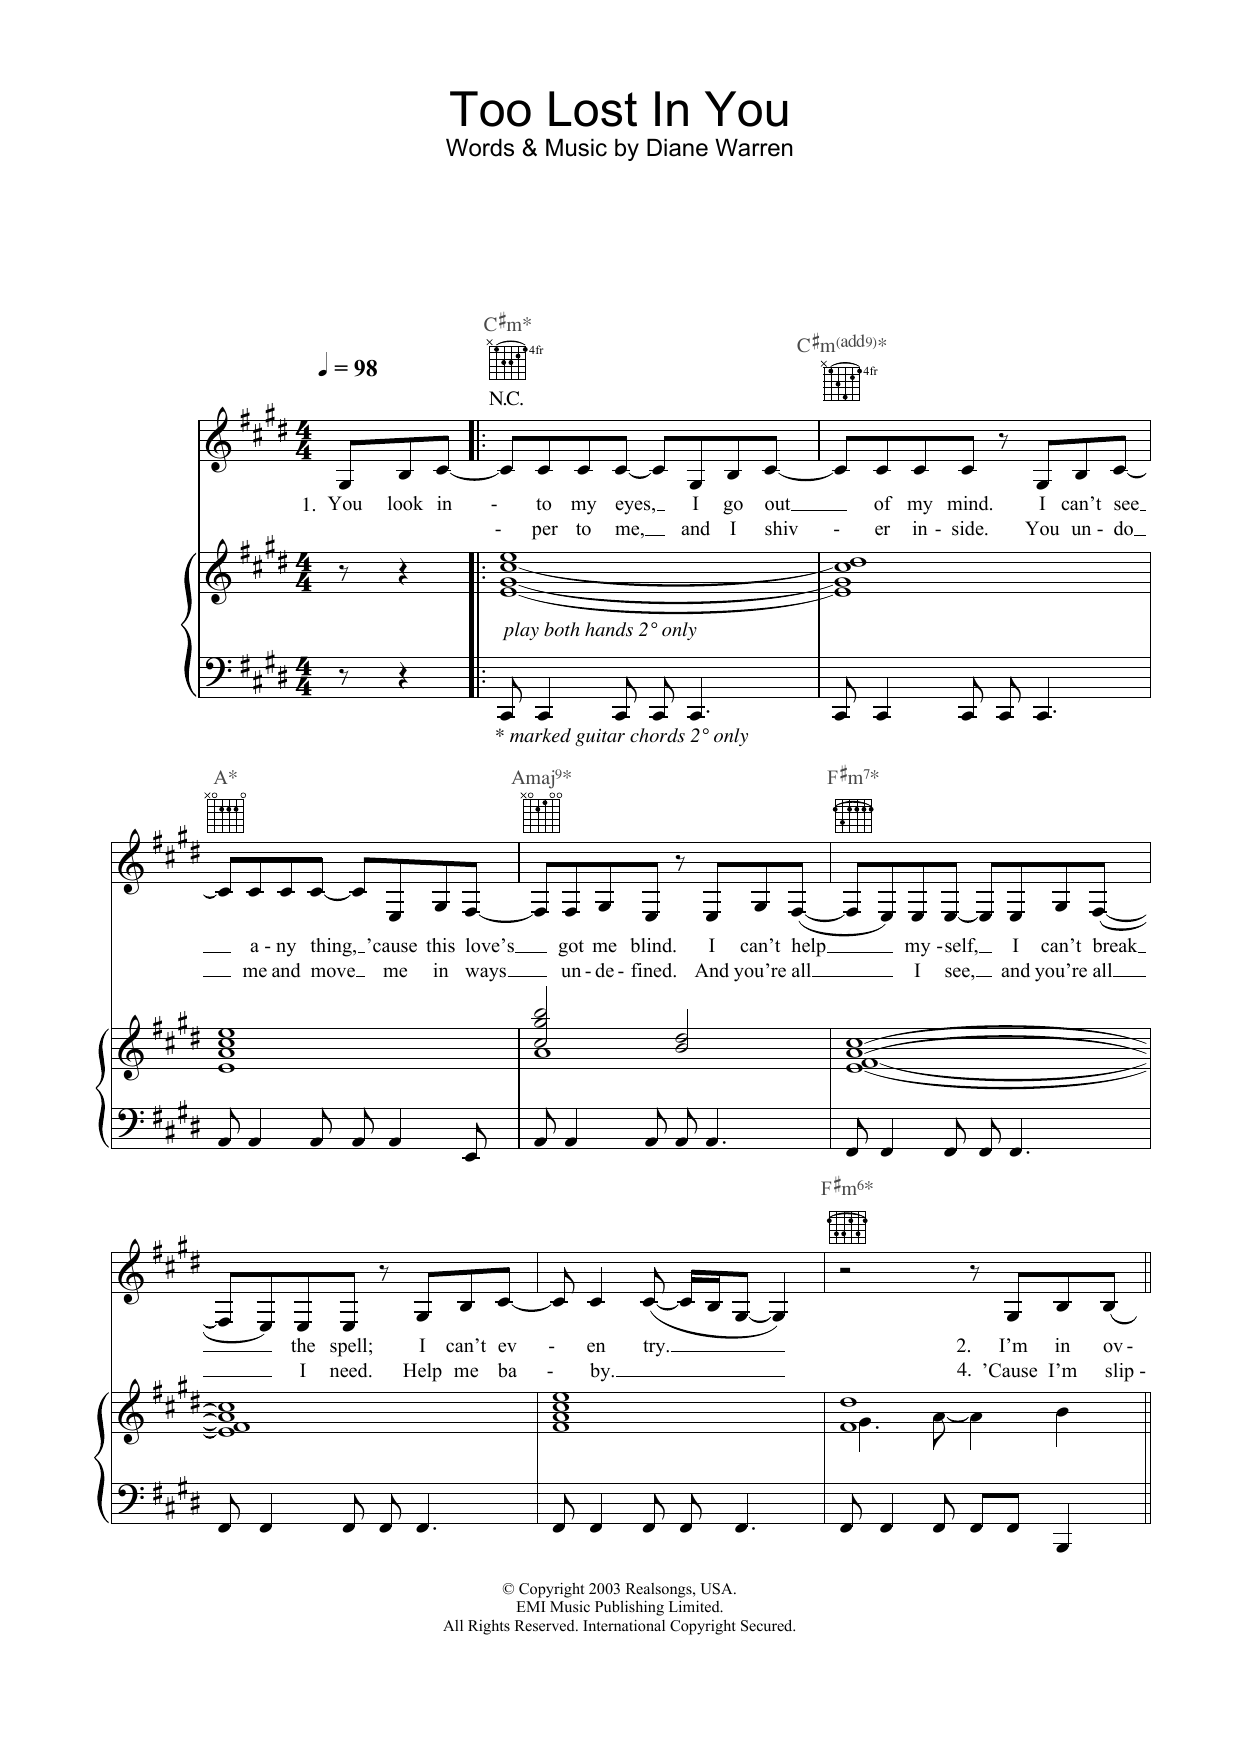 Sugababes Too Lost In You sheet music notes and chords. Download Printable PDF.